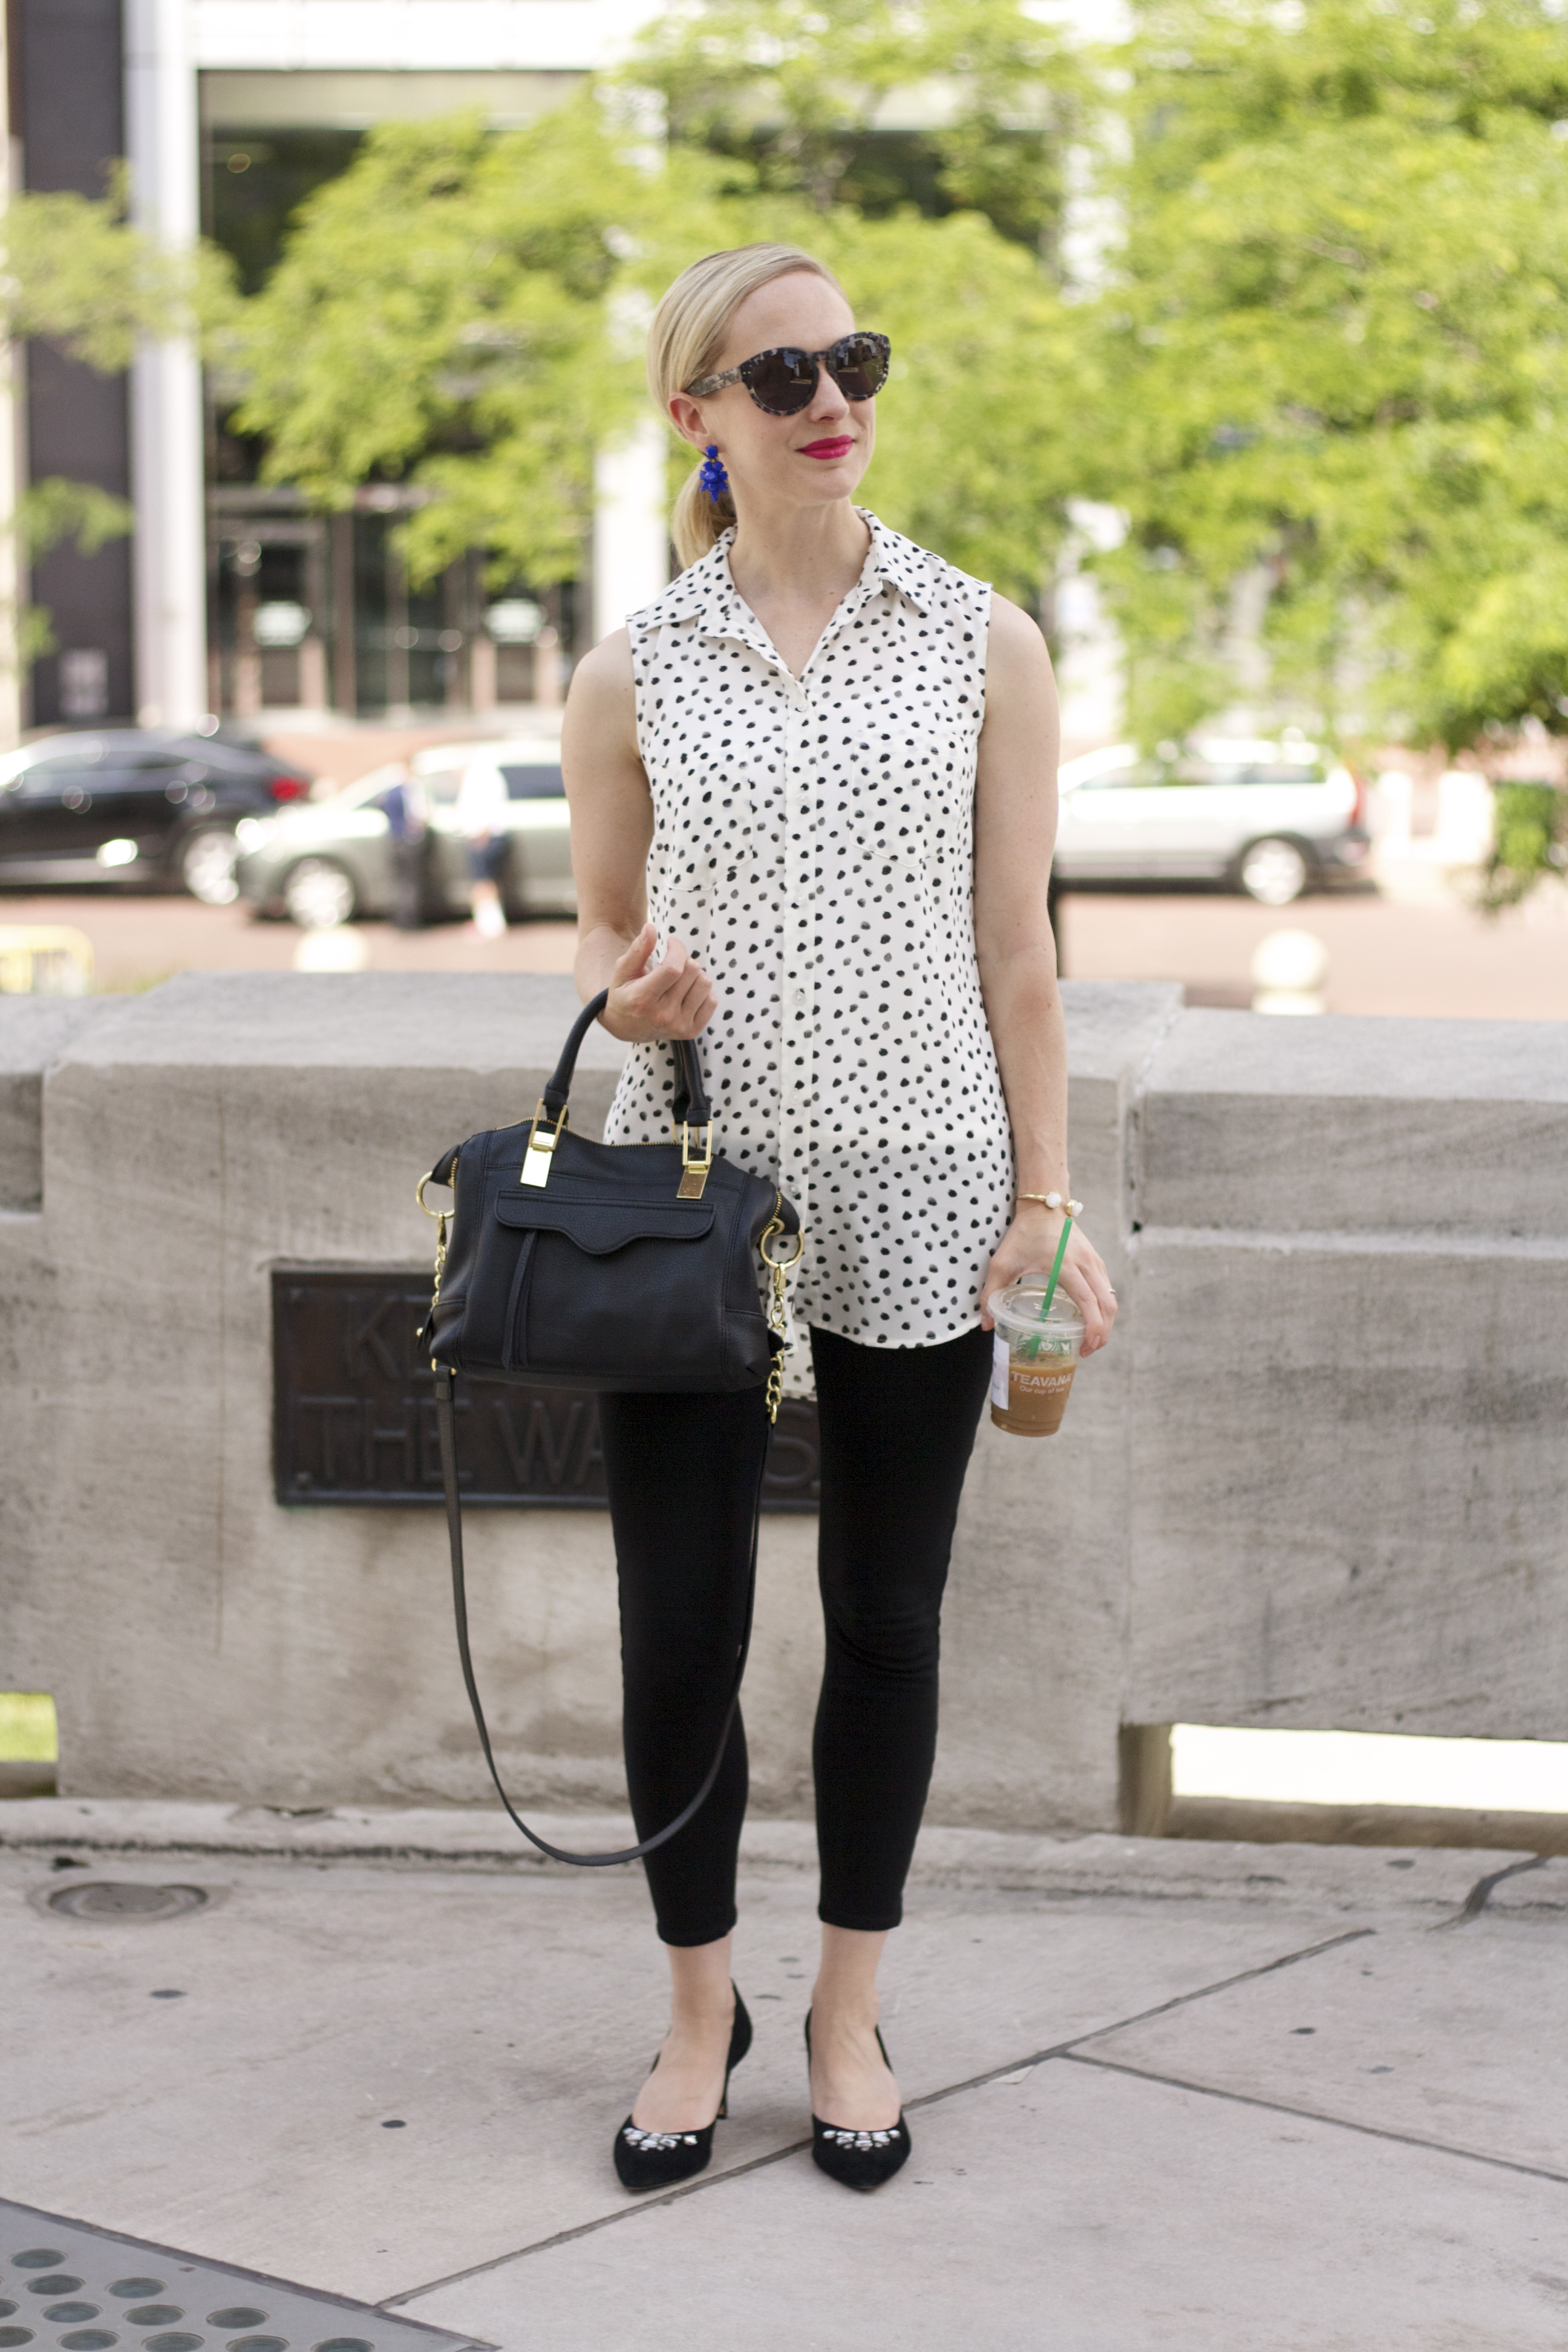 black and white outfit, polka dots, ponte pants outfit, statement earrings